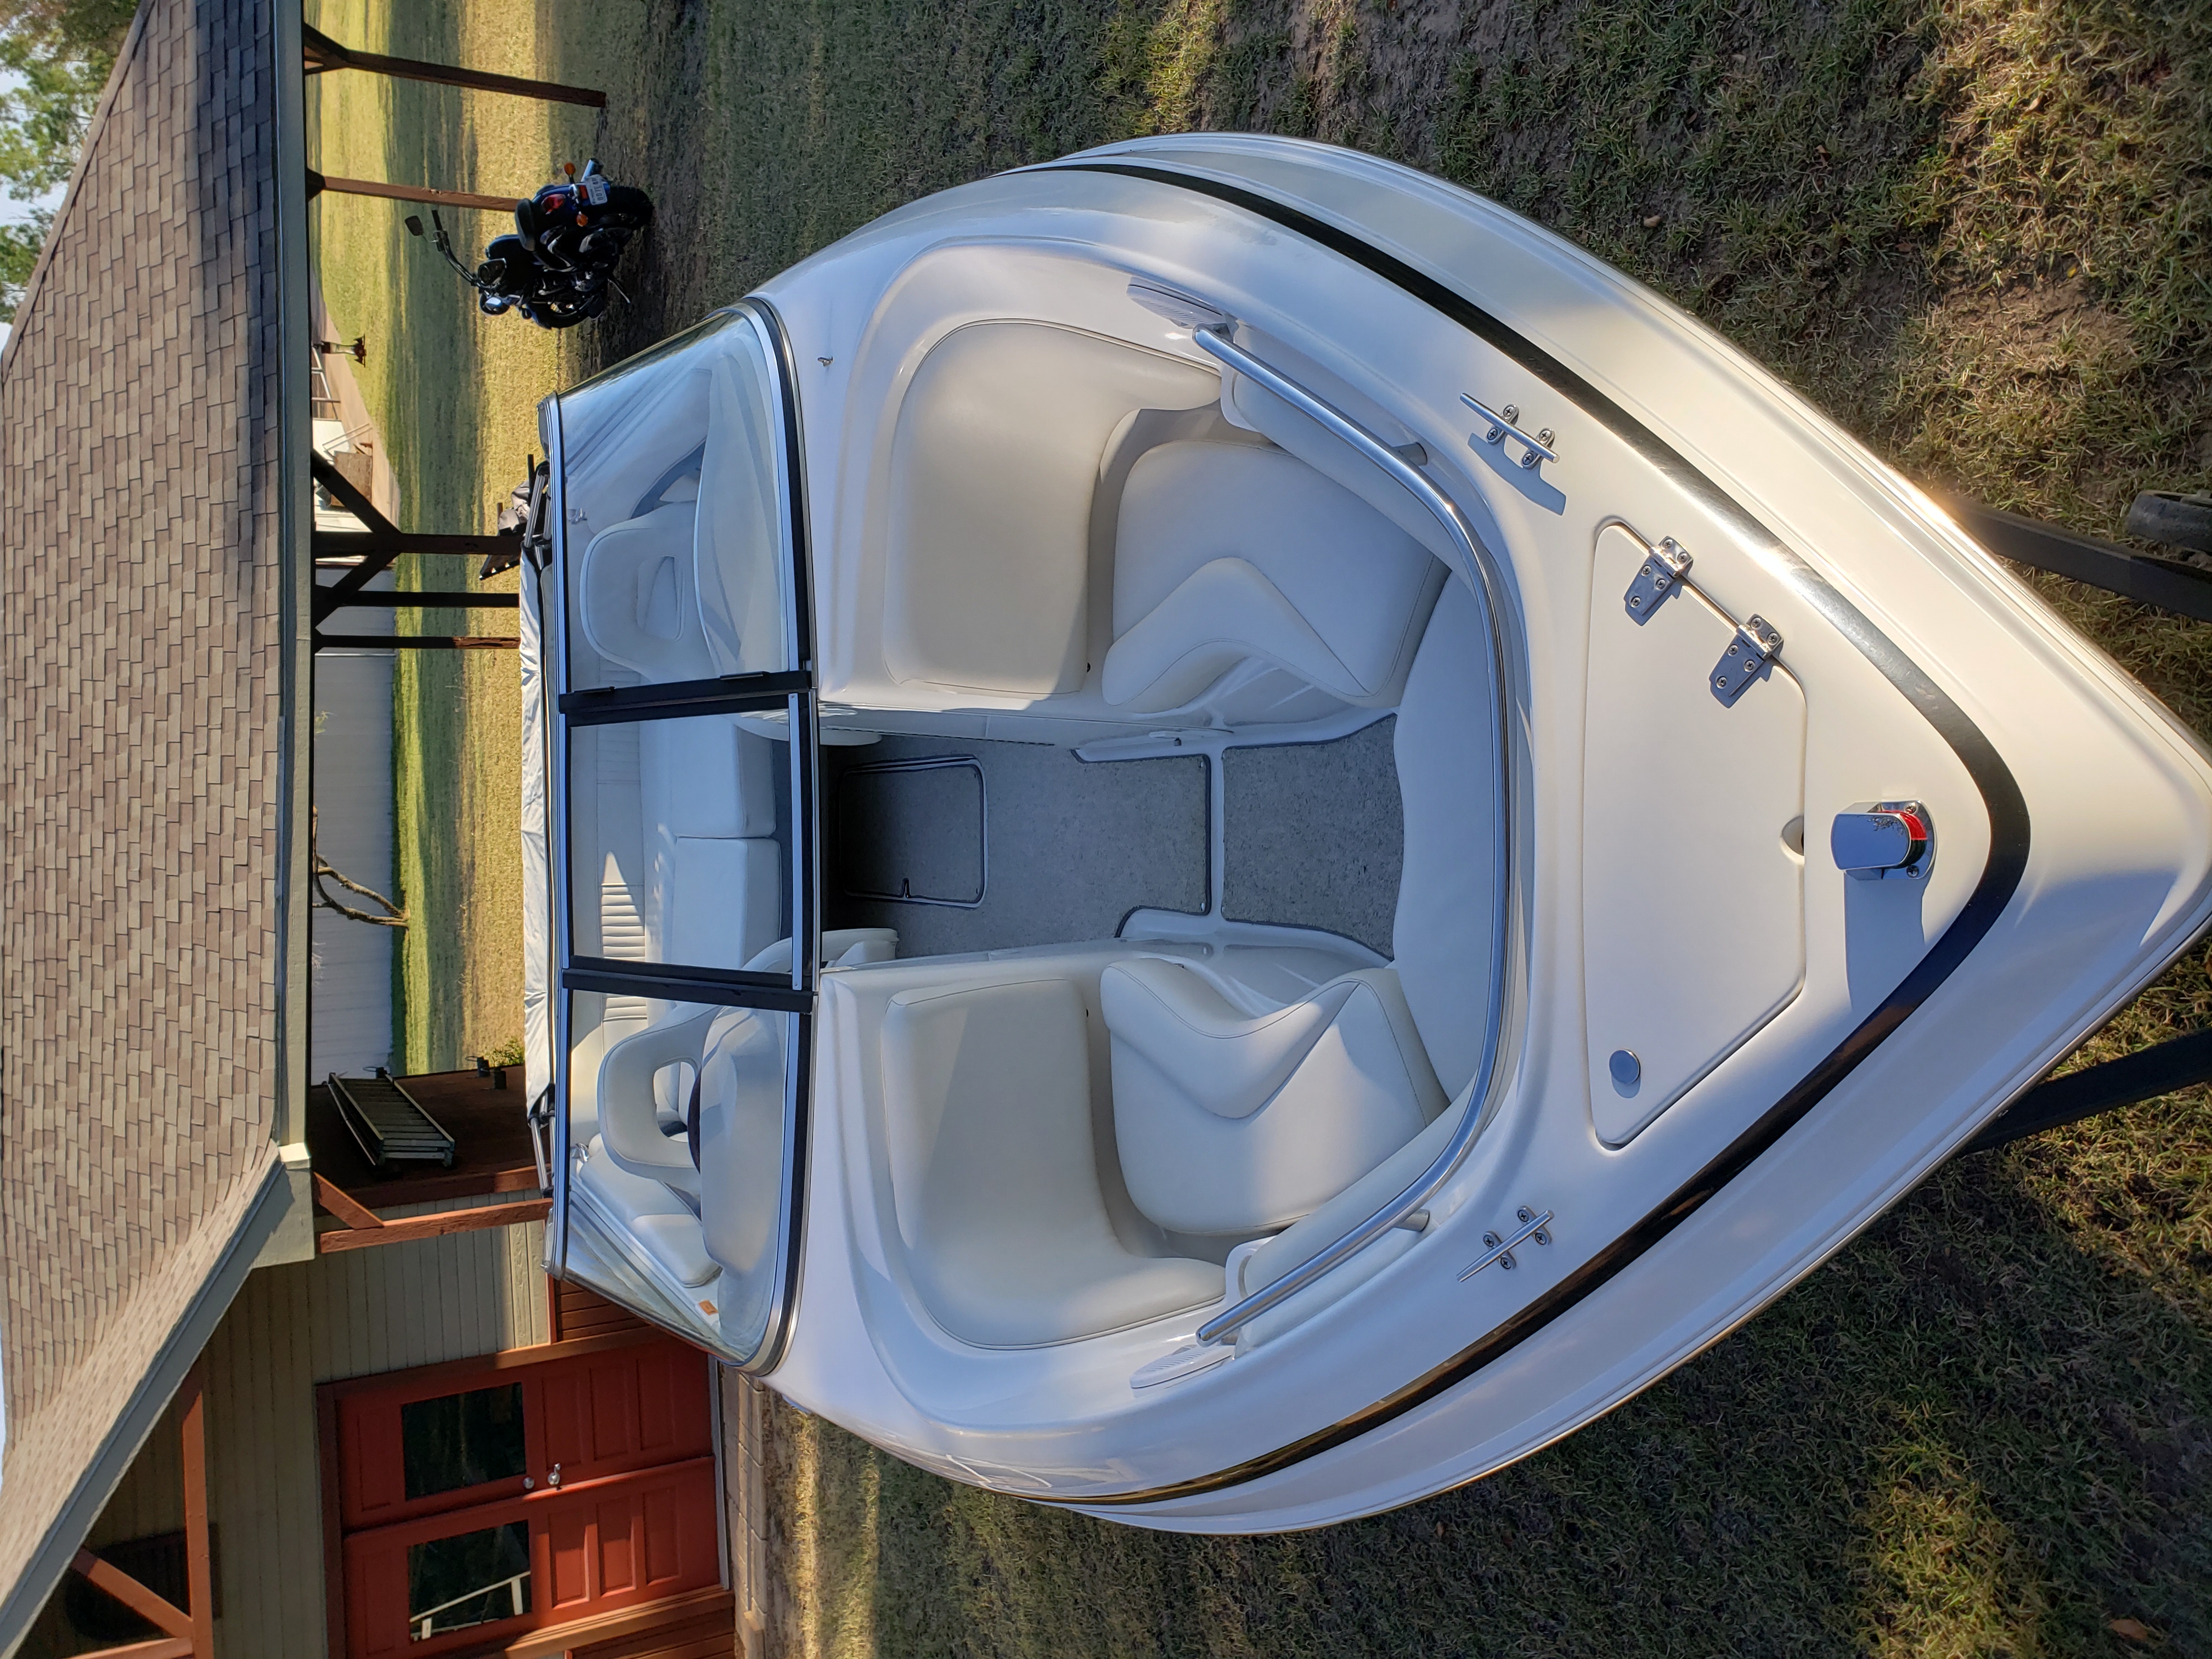 1999 Chris Craft 210 Bowrider Power boat for sale in Azle, TX - image 3 